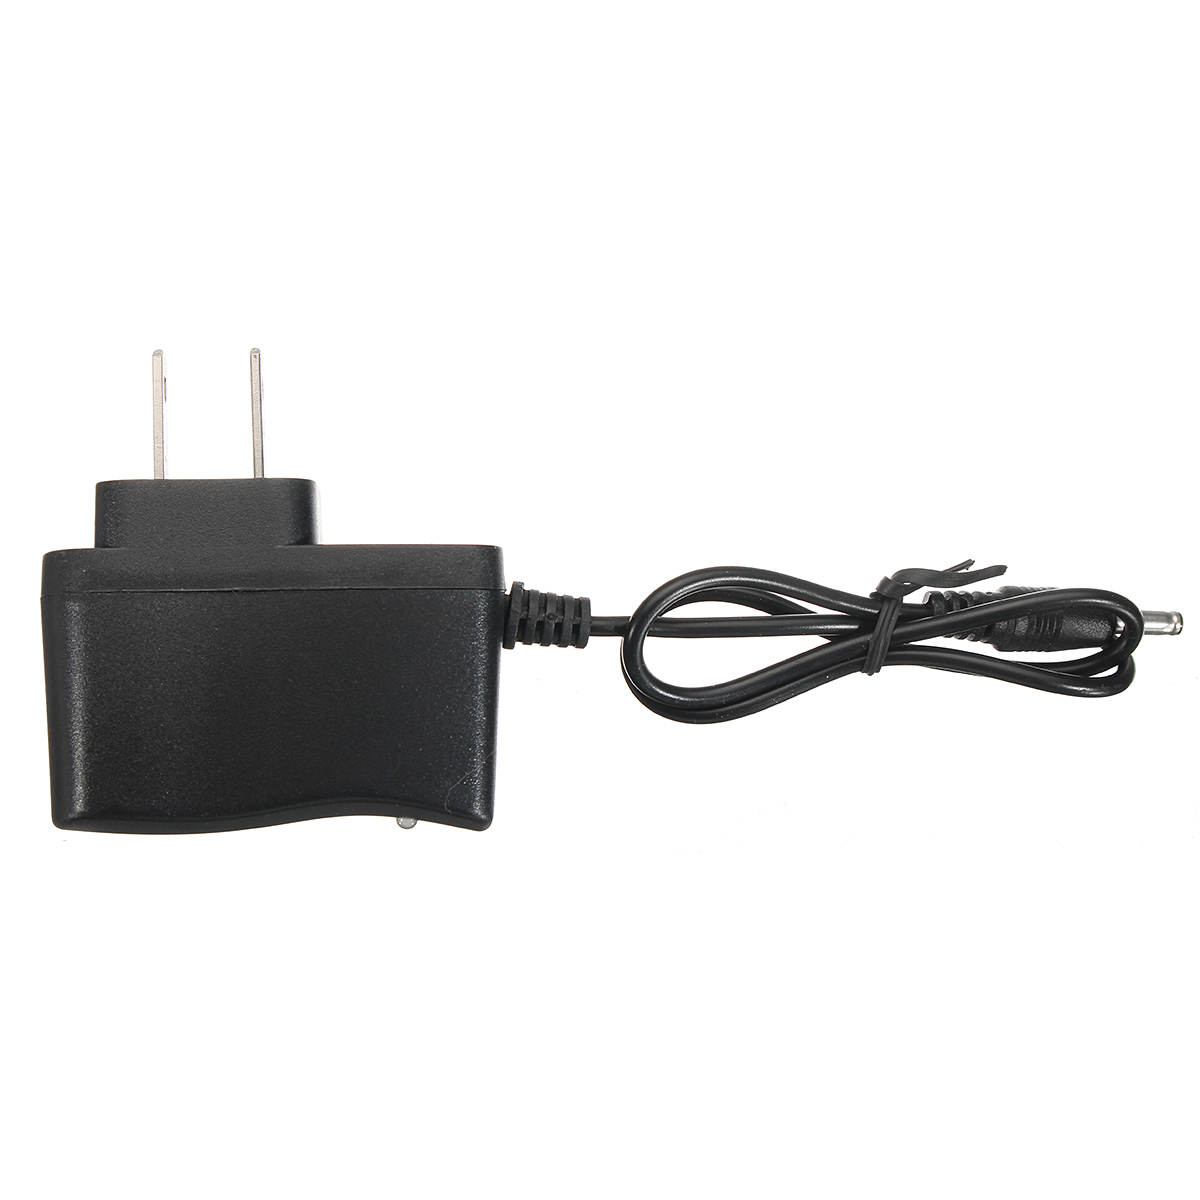 AC-100V-240V-Power-Supply-Charger-US-Plug-Power-Supply-Adapter-35MM-DC-Head-1521983-2